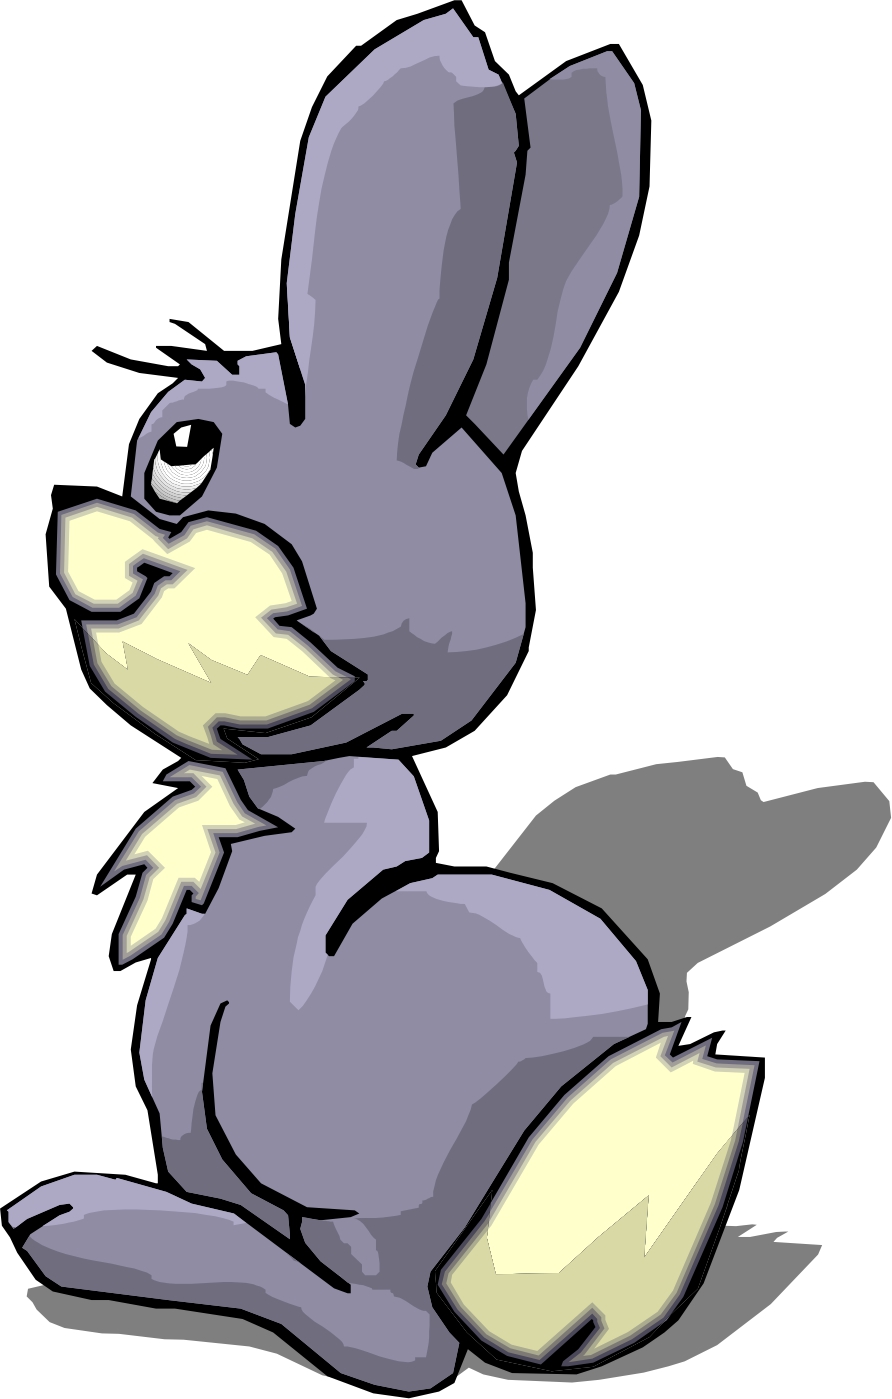 Cute Rabbit Cartoon Images & Pictures - Becuo